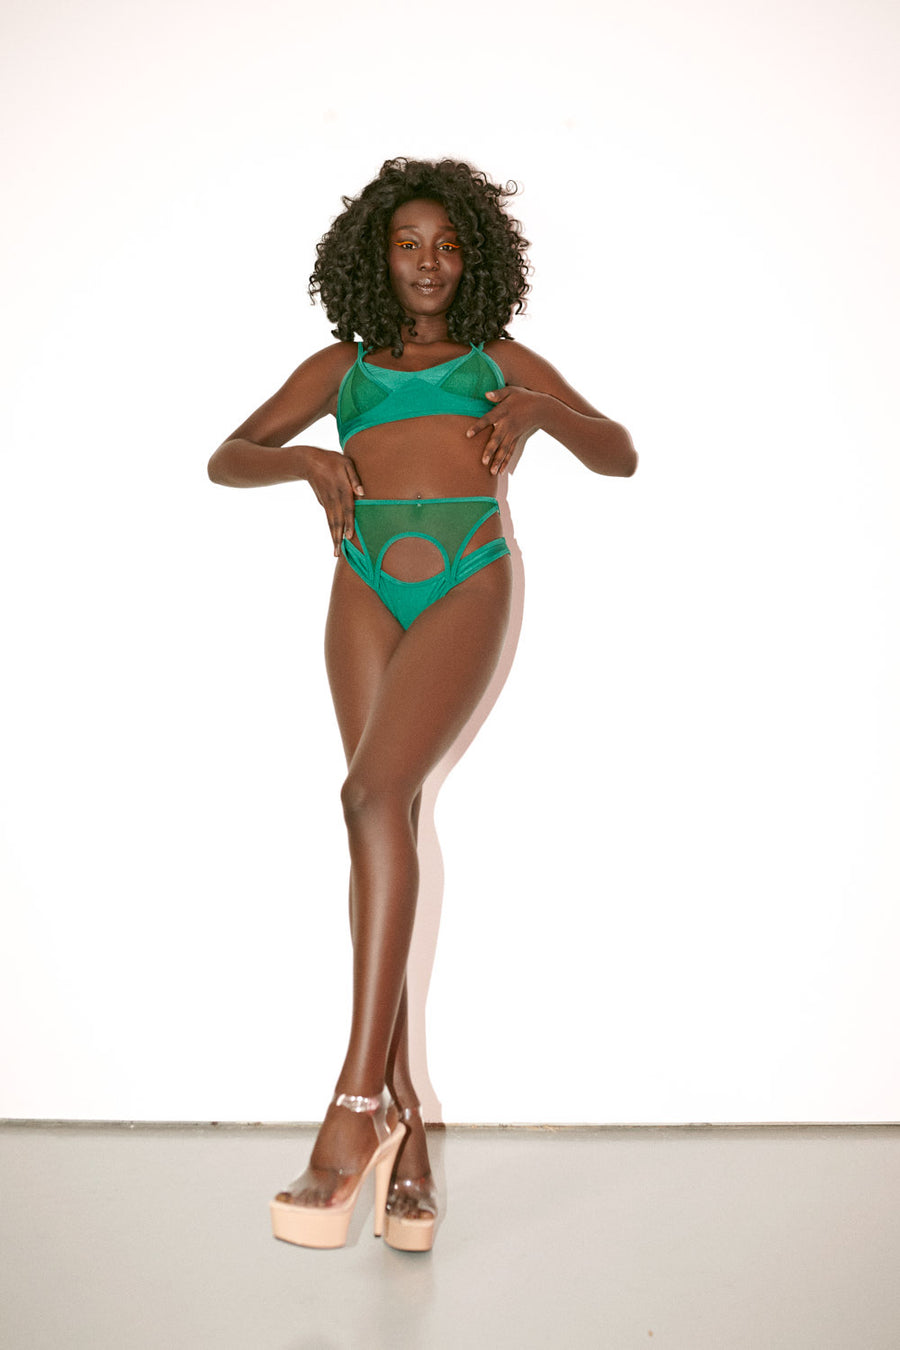 Forest green waspie bikini bottoms with mesh details model posing